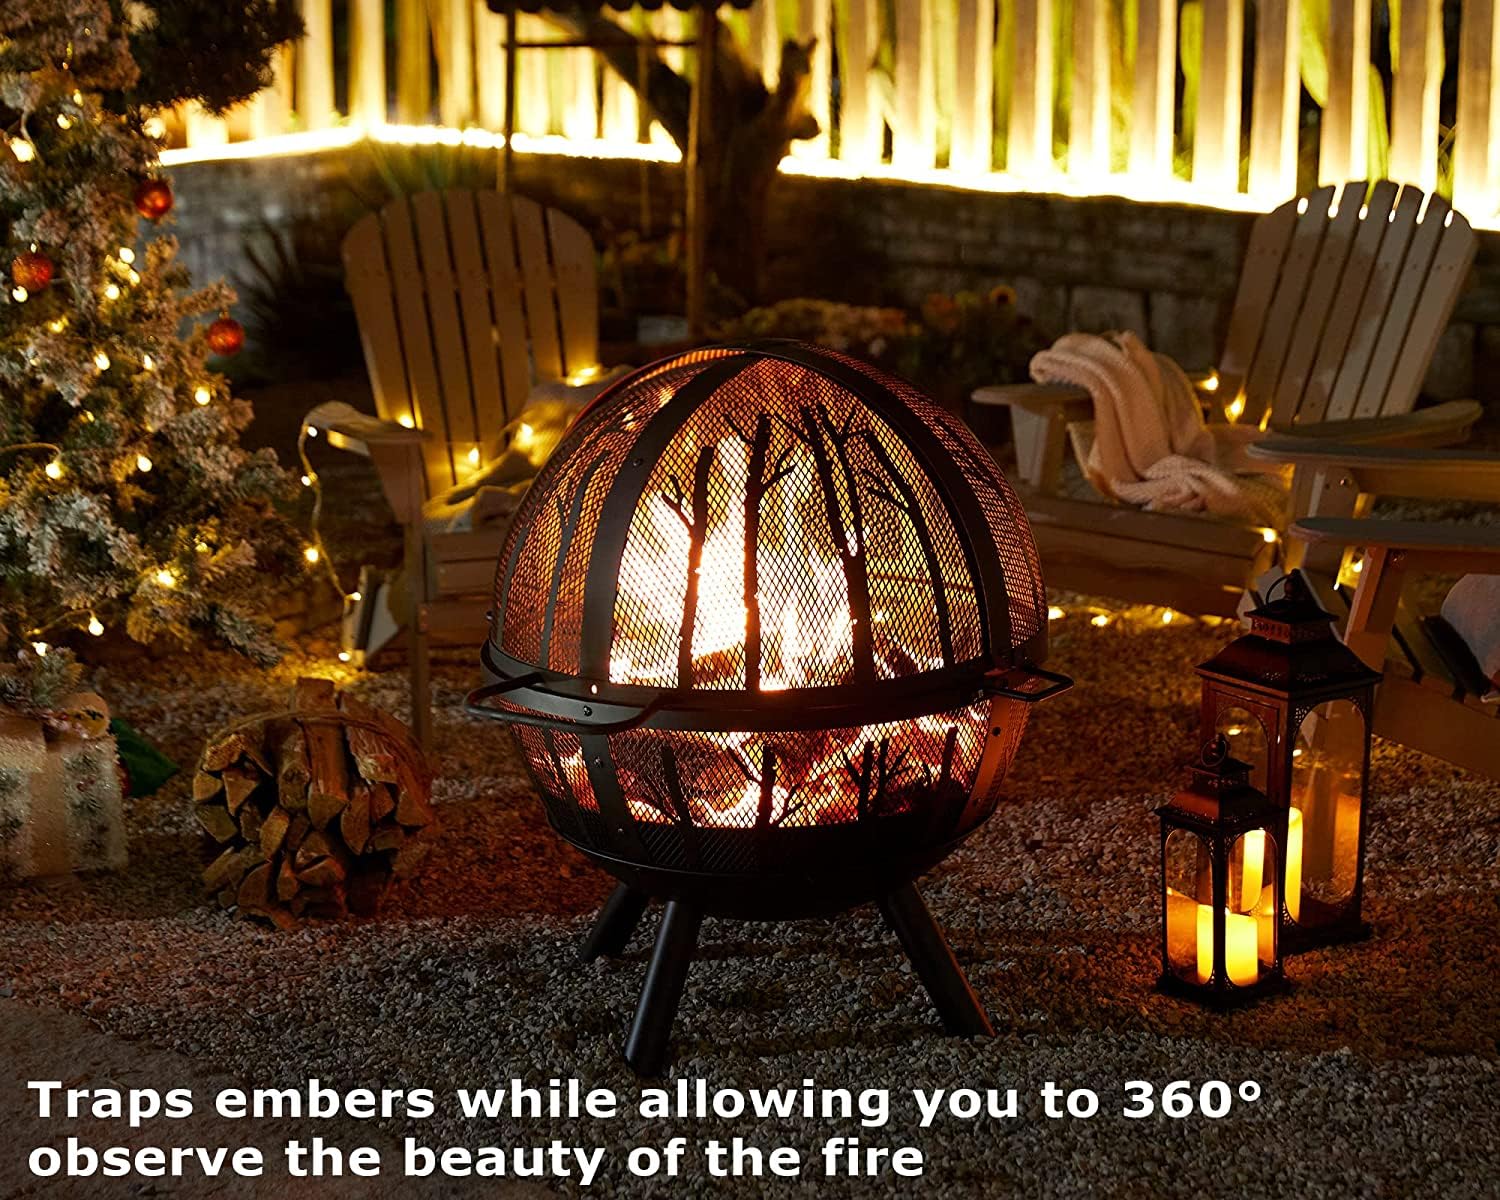 Fissfire 35 Inch Fire Pit Sphere, Outdoor Wood Burning Flaming Ball FirePit with Pivot Spark Screen, Backyard Patio Camping Beach Bonfire Pit